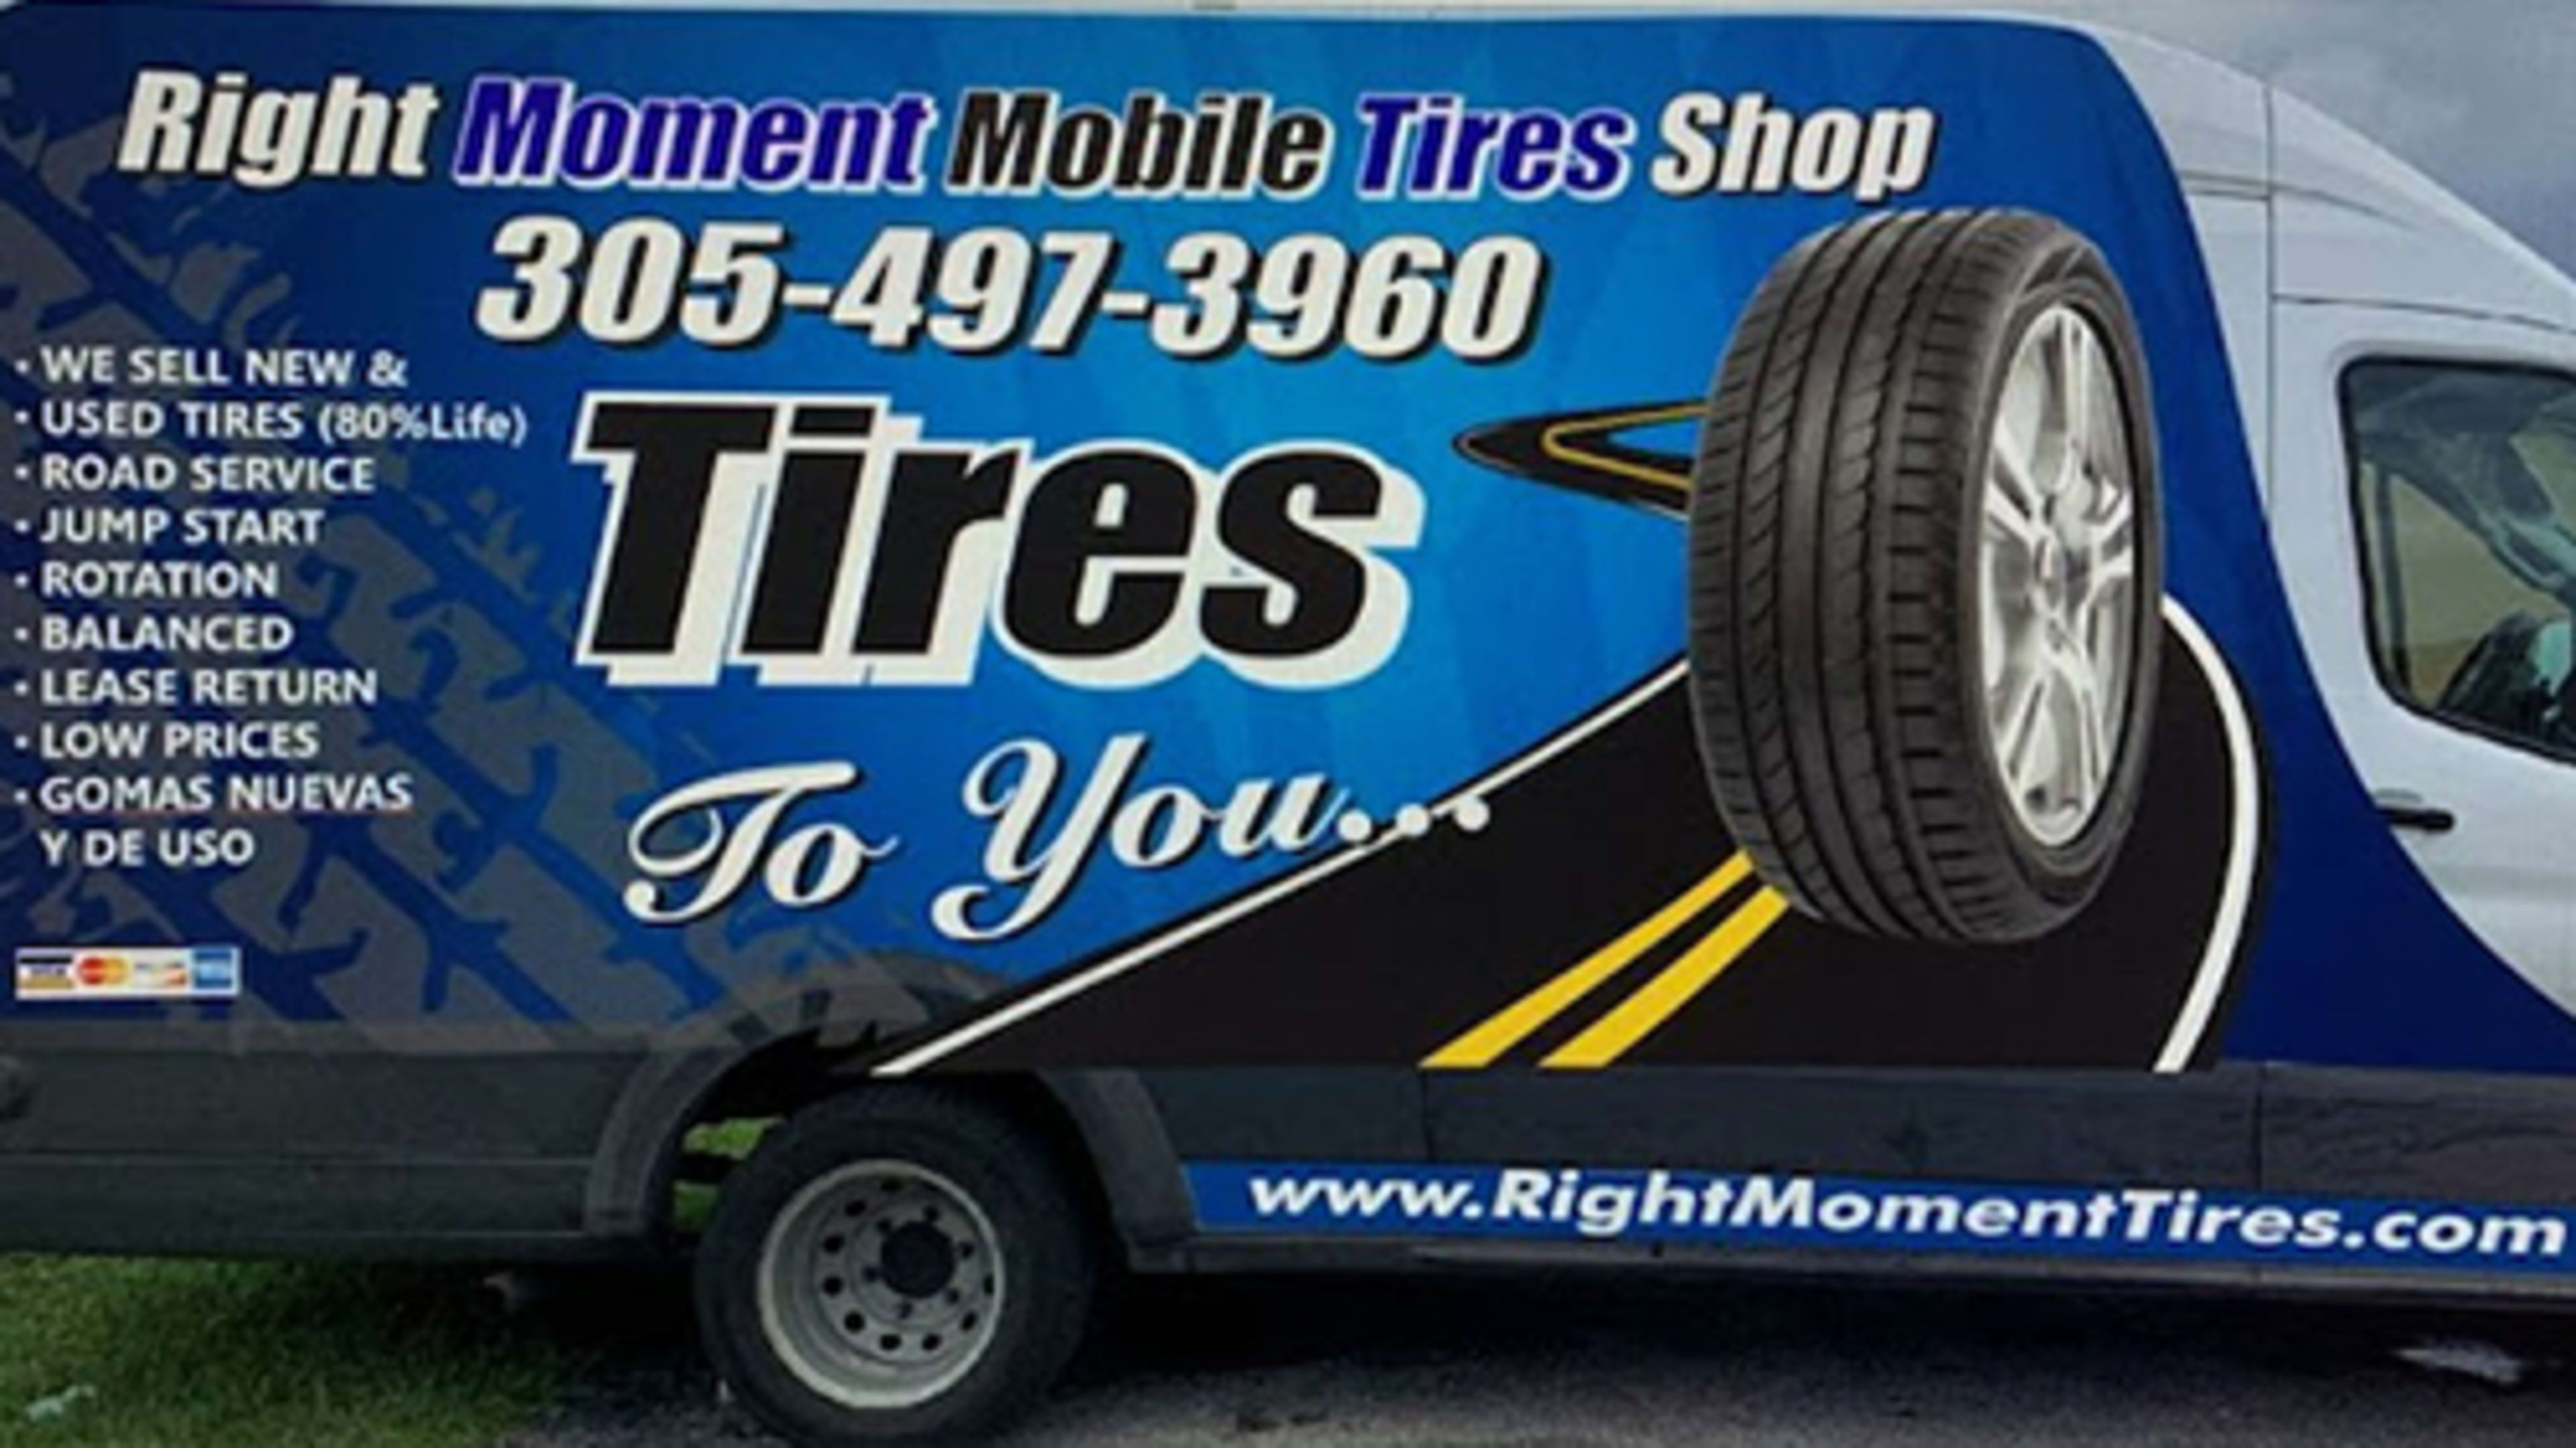 Mobile Installation by Right Moment Mobile tire in Miami, FL (20351 SW  140th Ave): Mobile Tire Installation Near Me